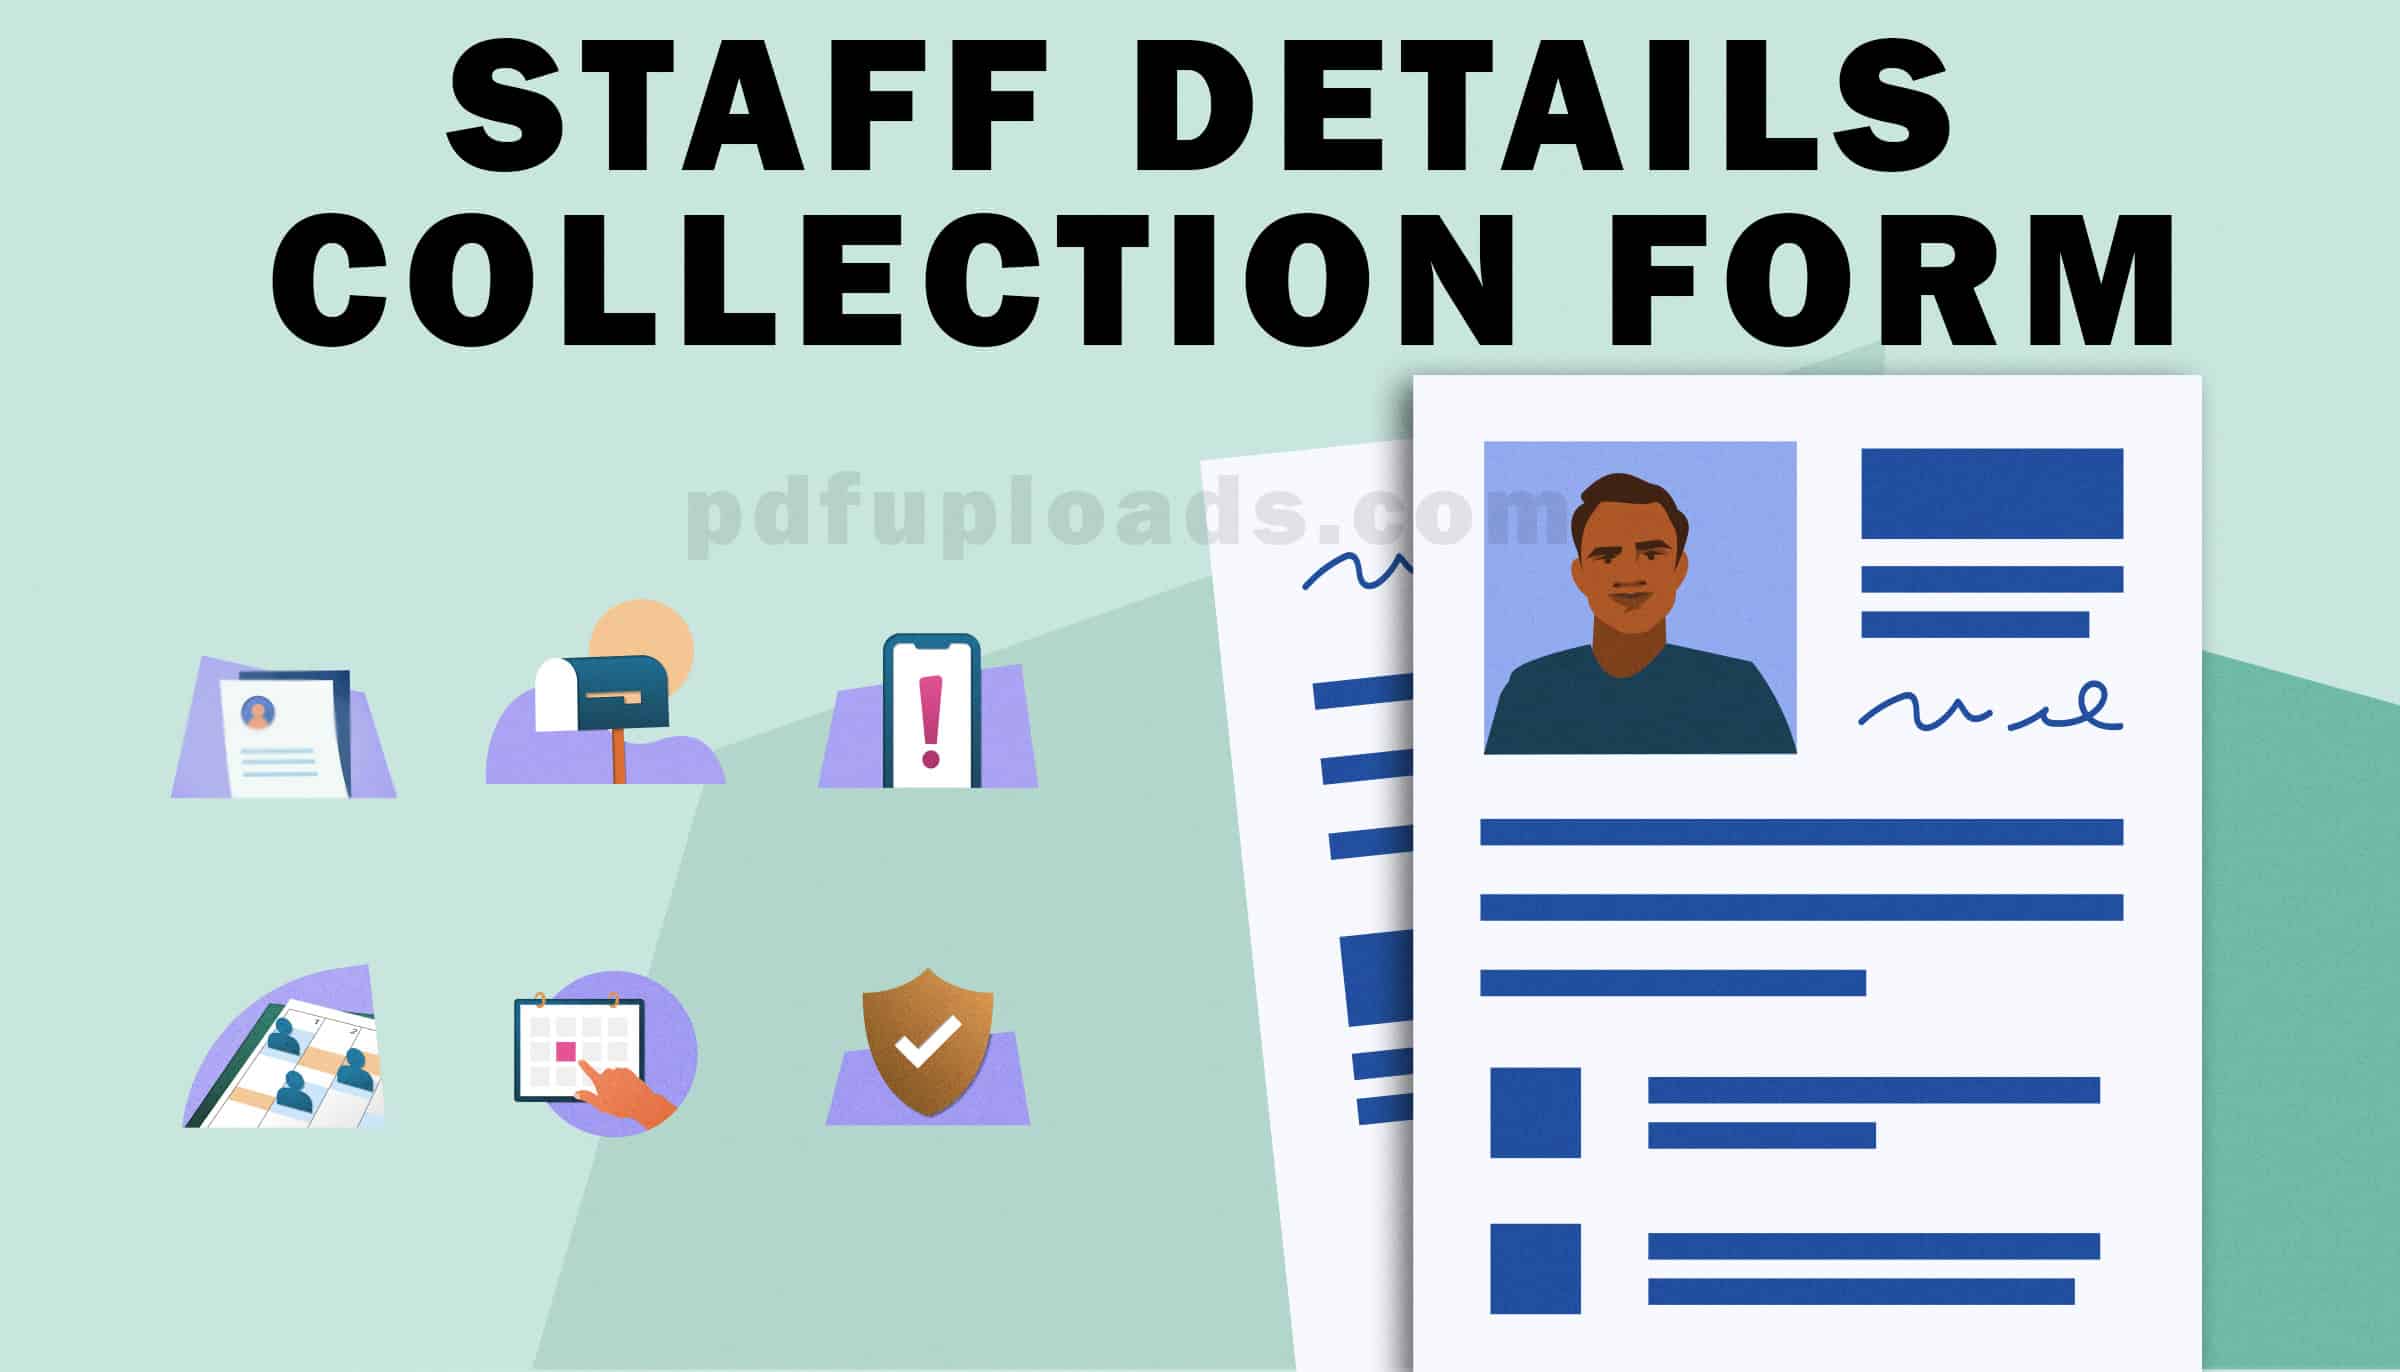 Download Staff Details collection form in PDF format for Shops, Hotels and Business